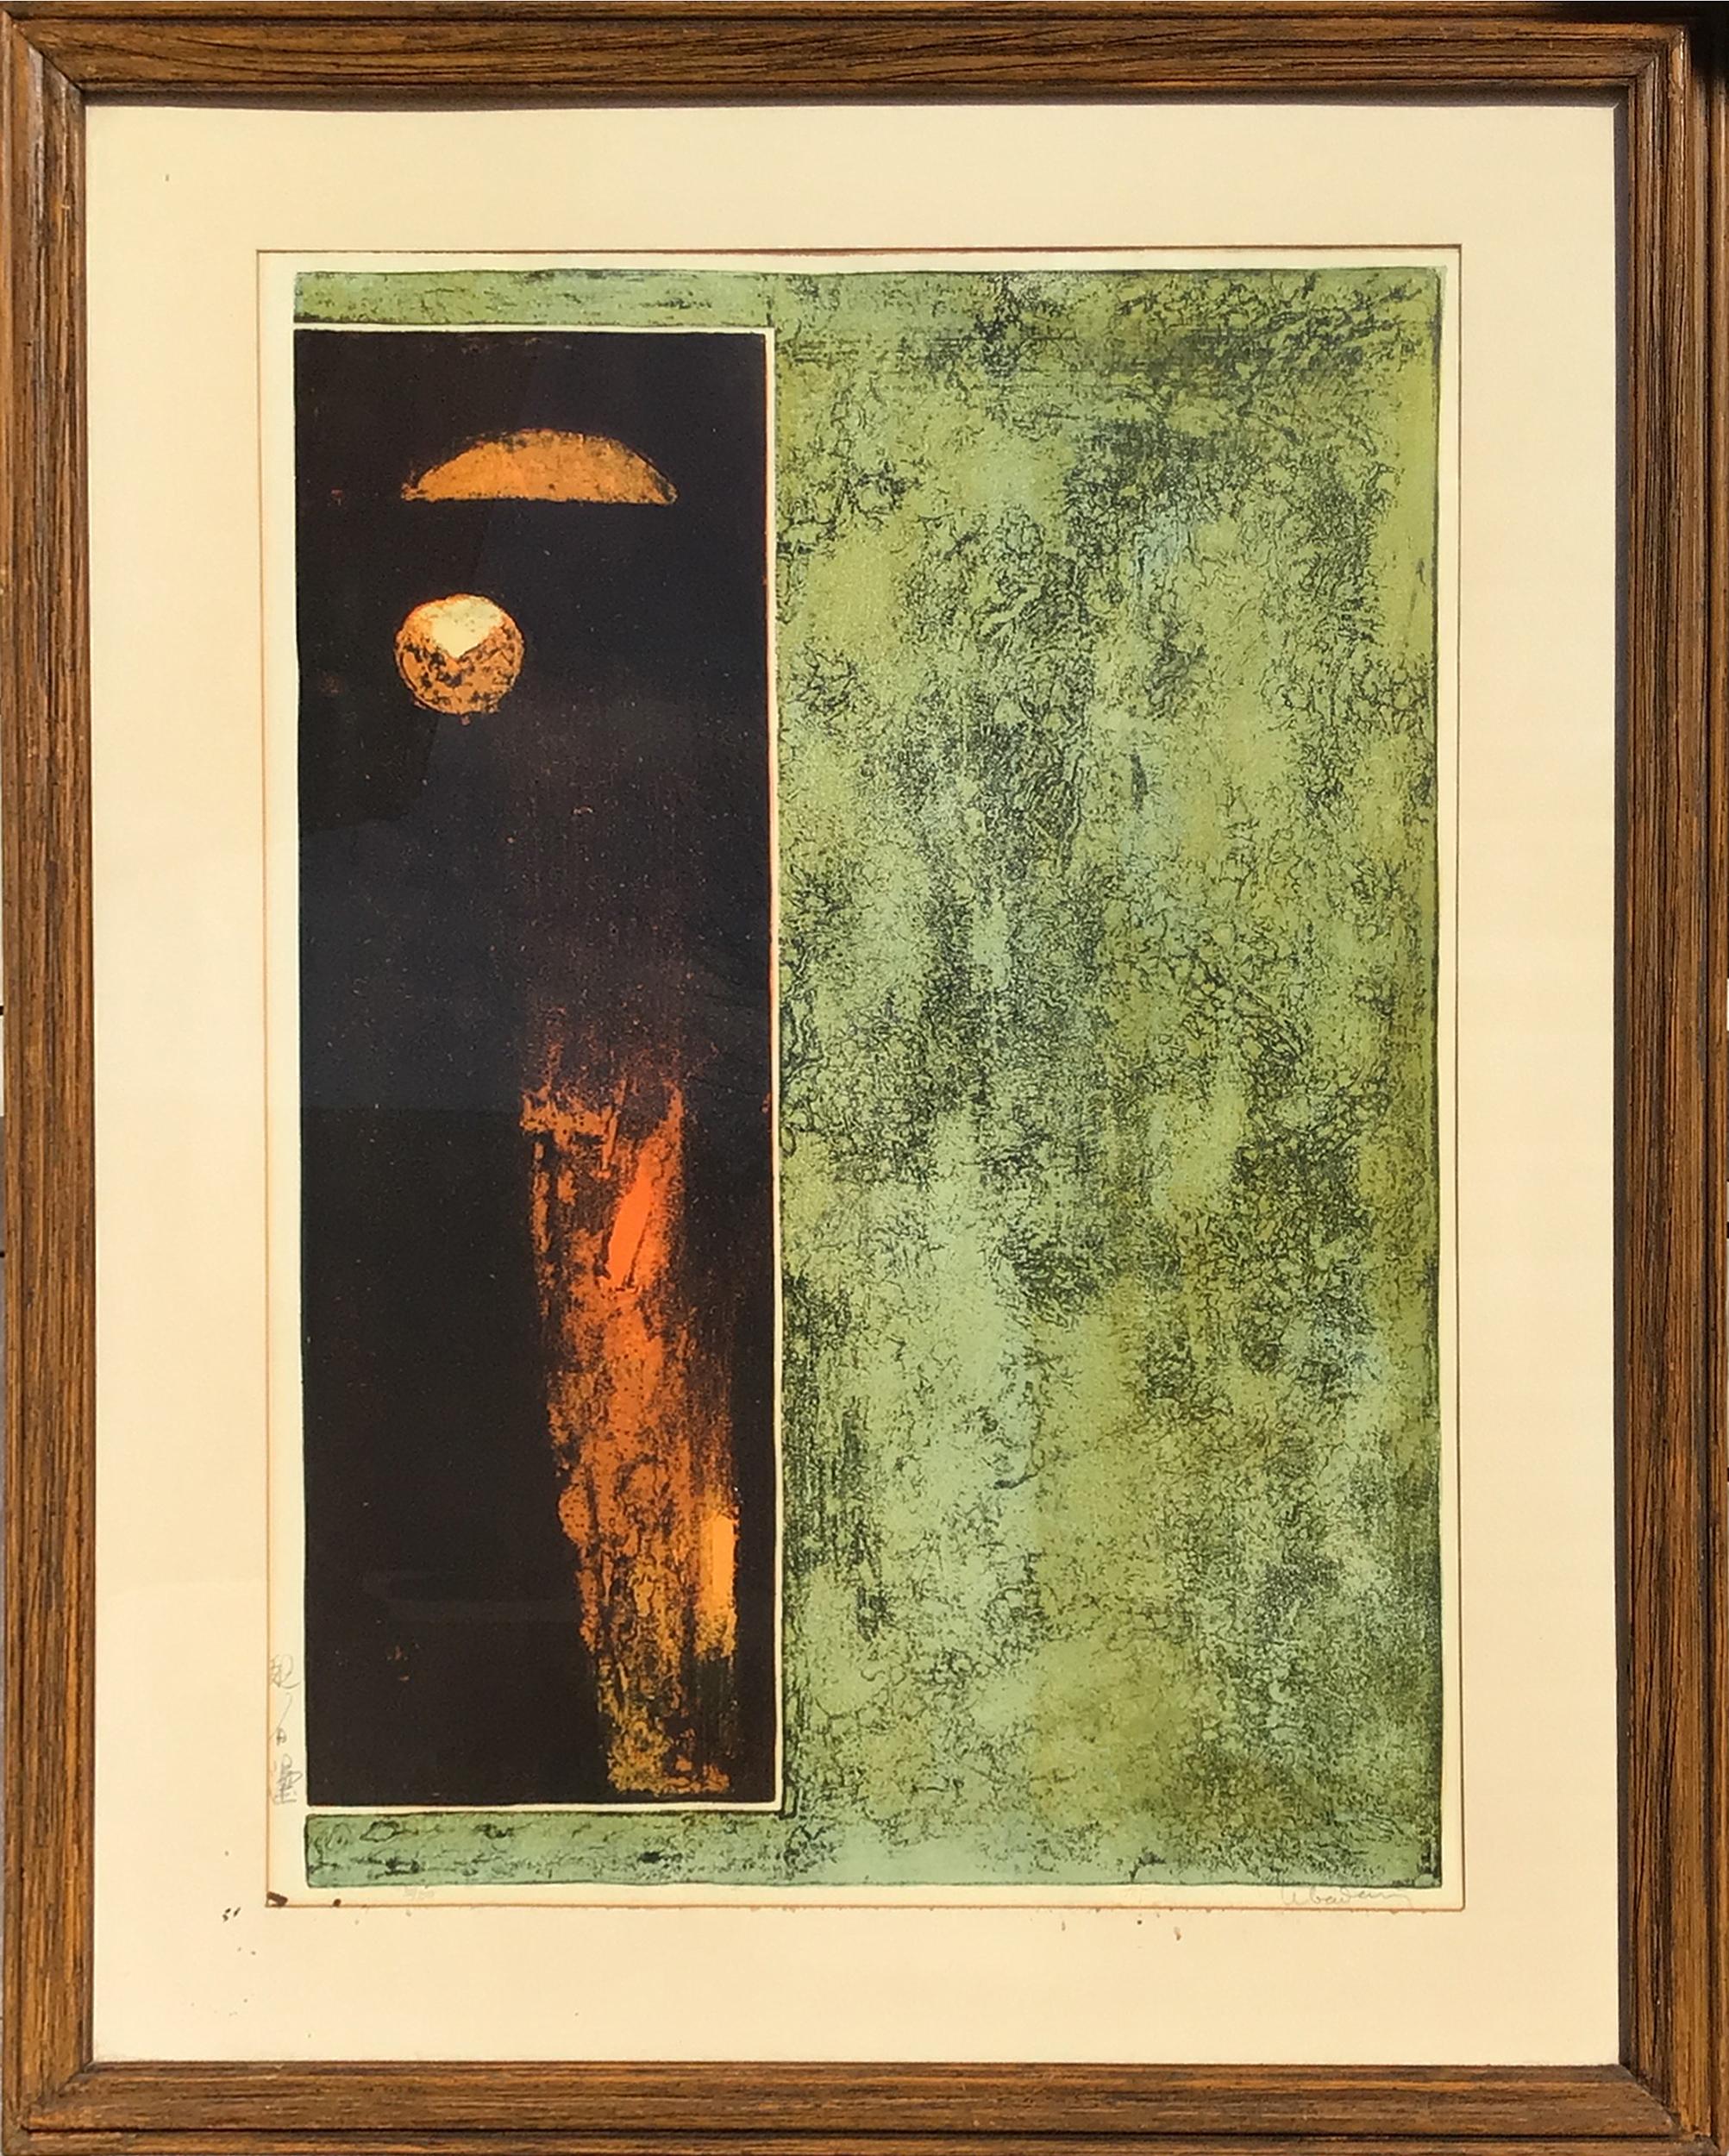 An Abstract etching by the artist Lebadang. The Minimalist composition uses only green, orange, and black to create a stark contrast of shapes. This piece is signed and numbered in pencil and nicely framed.

In Space
Lebadang (aka Hoi), Vietnamese